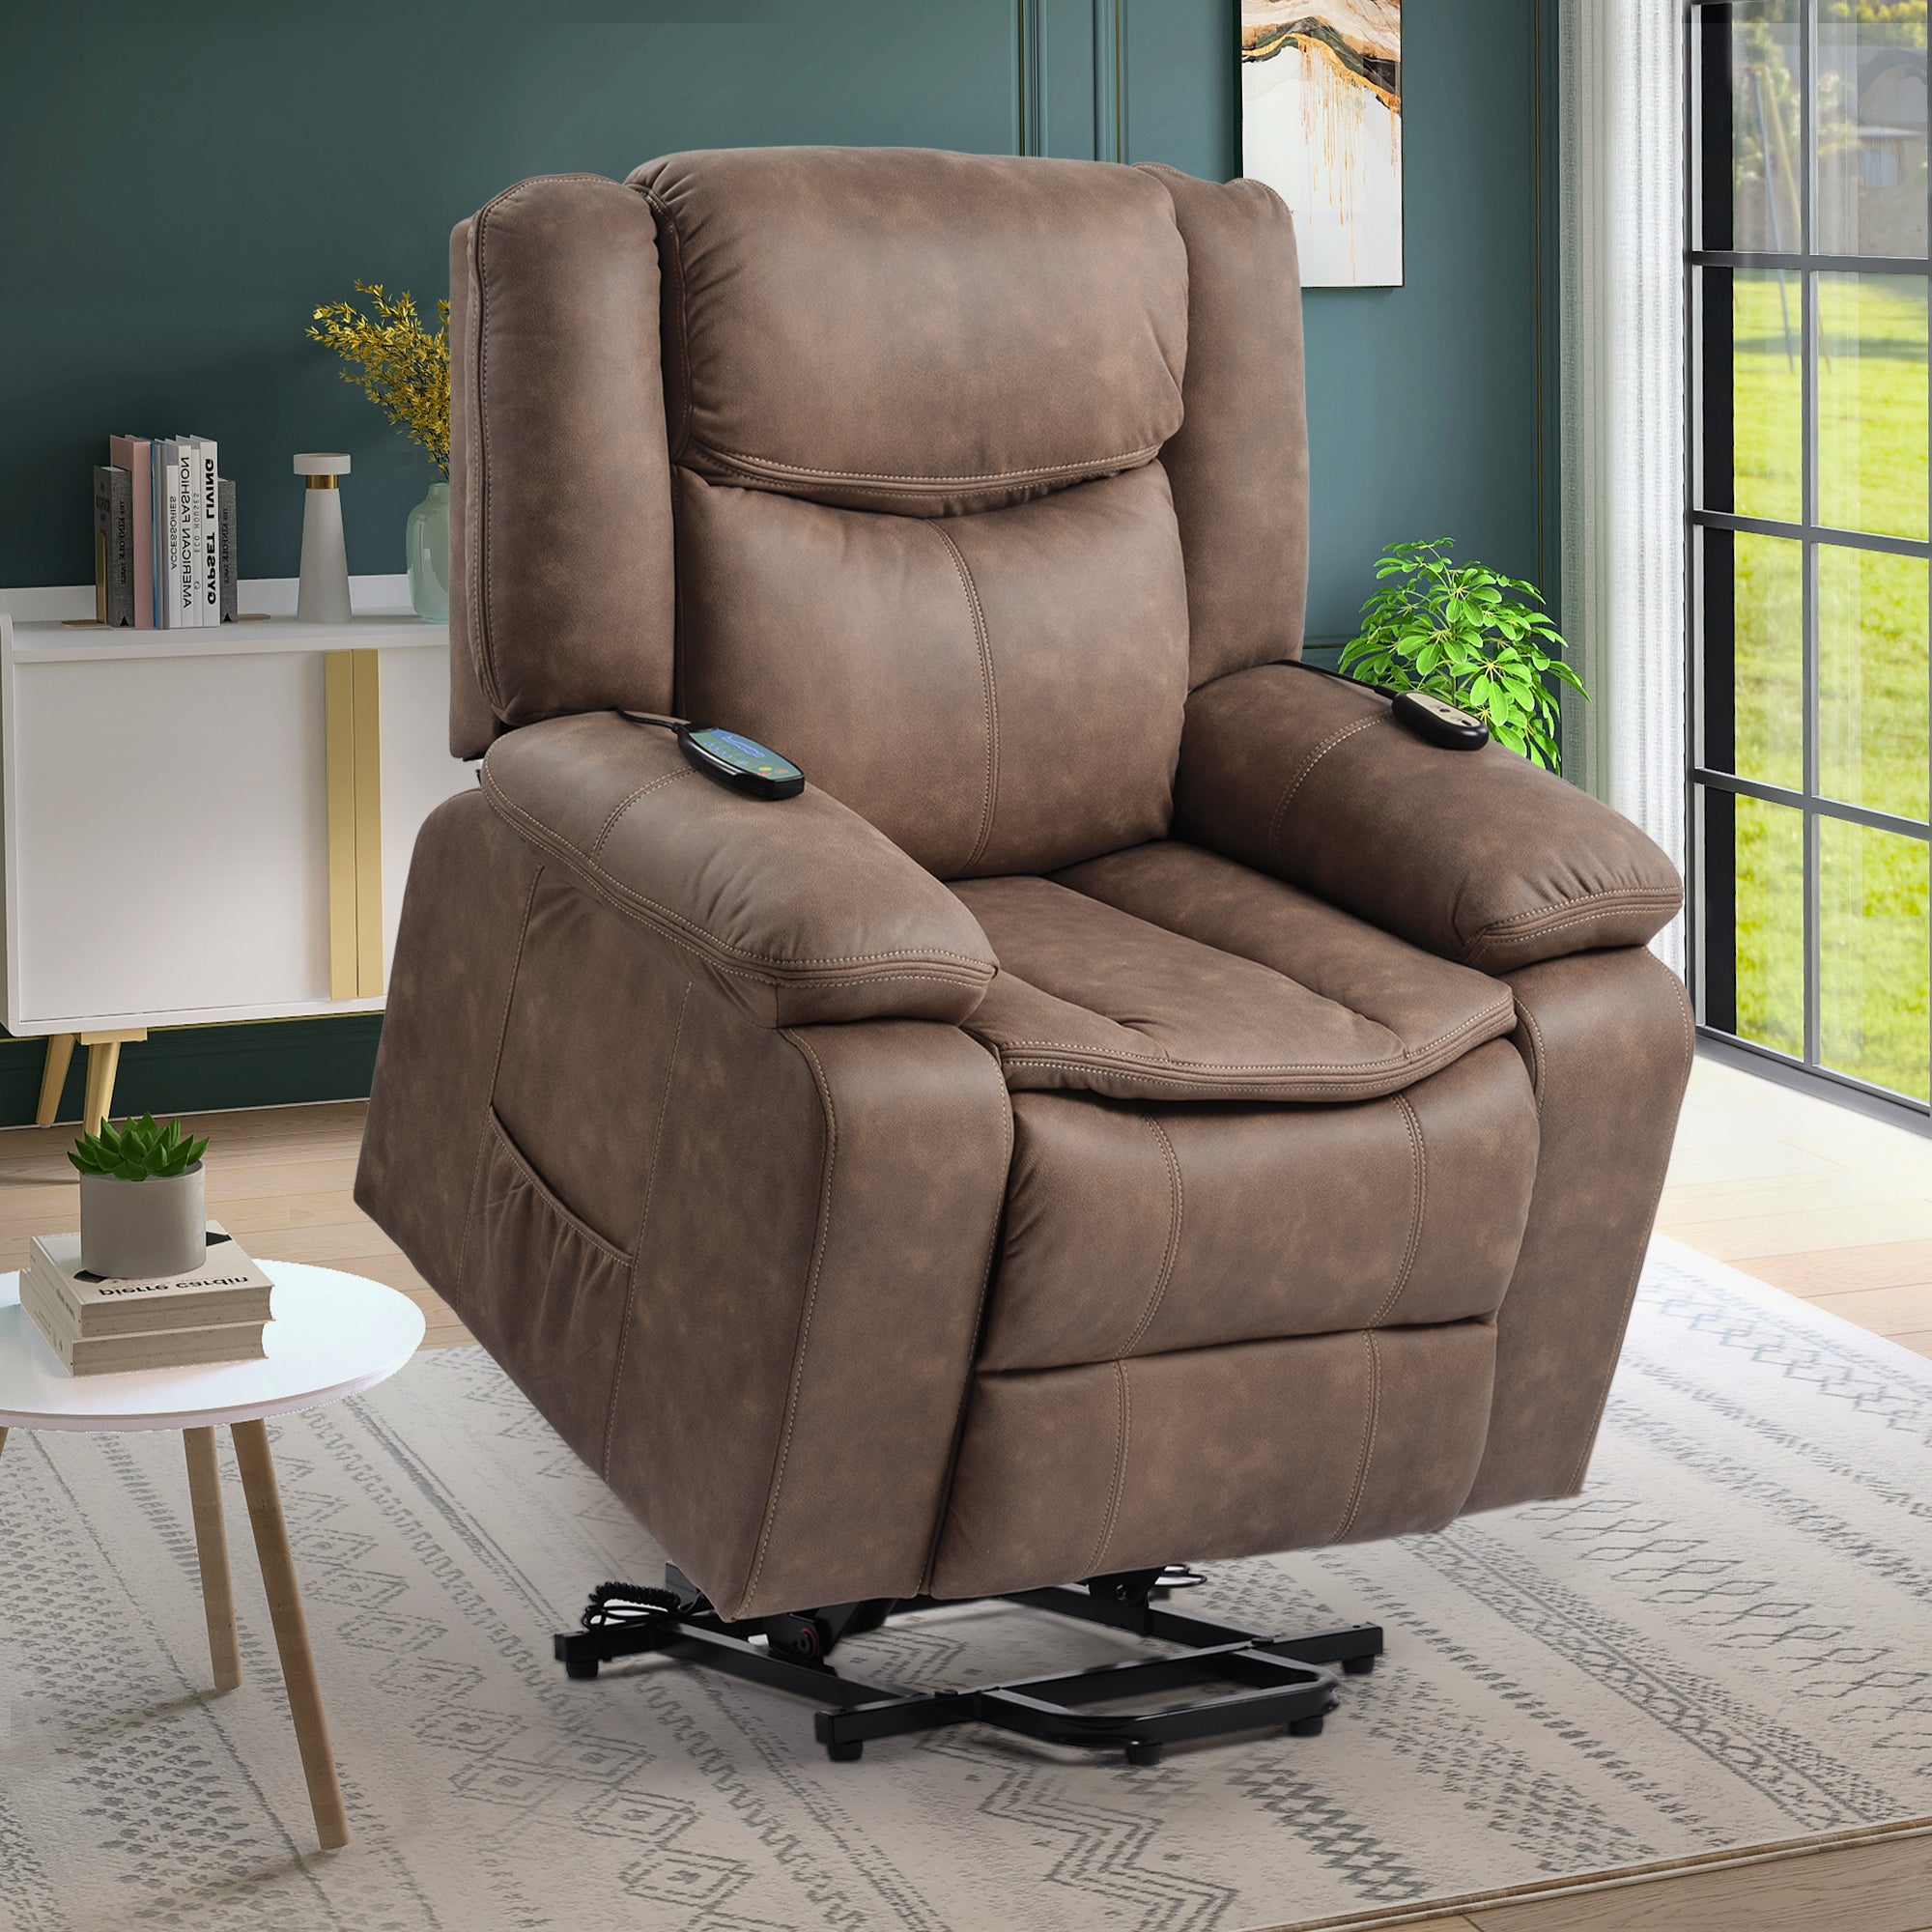 Power Lift Chair Recliner with Adjustable Massage and Heat, lifted angle room view